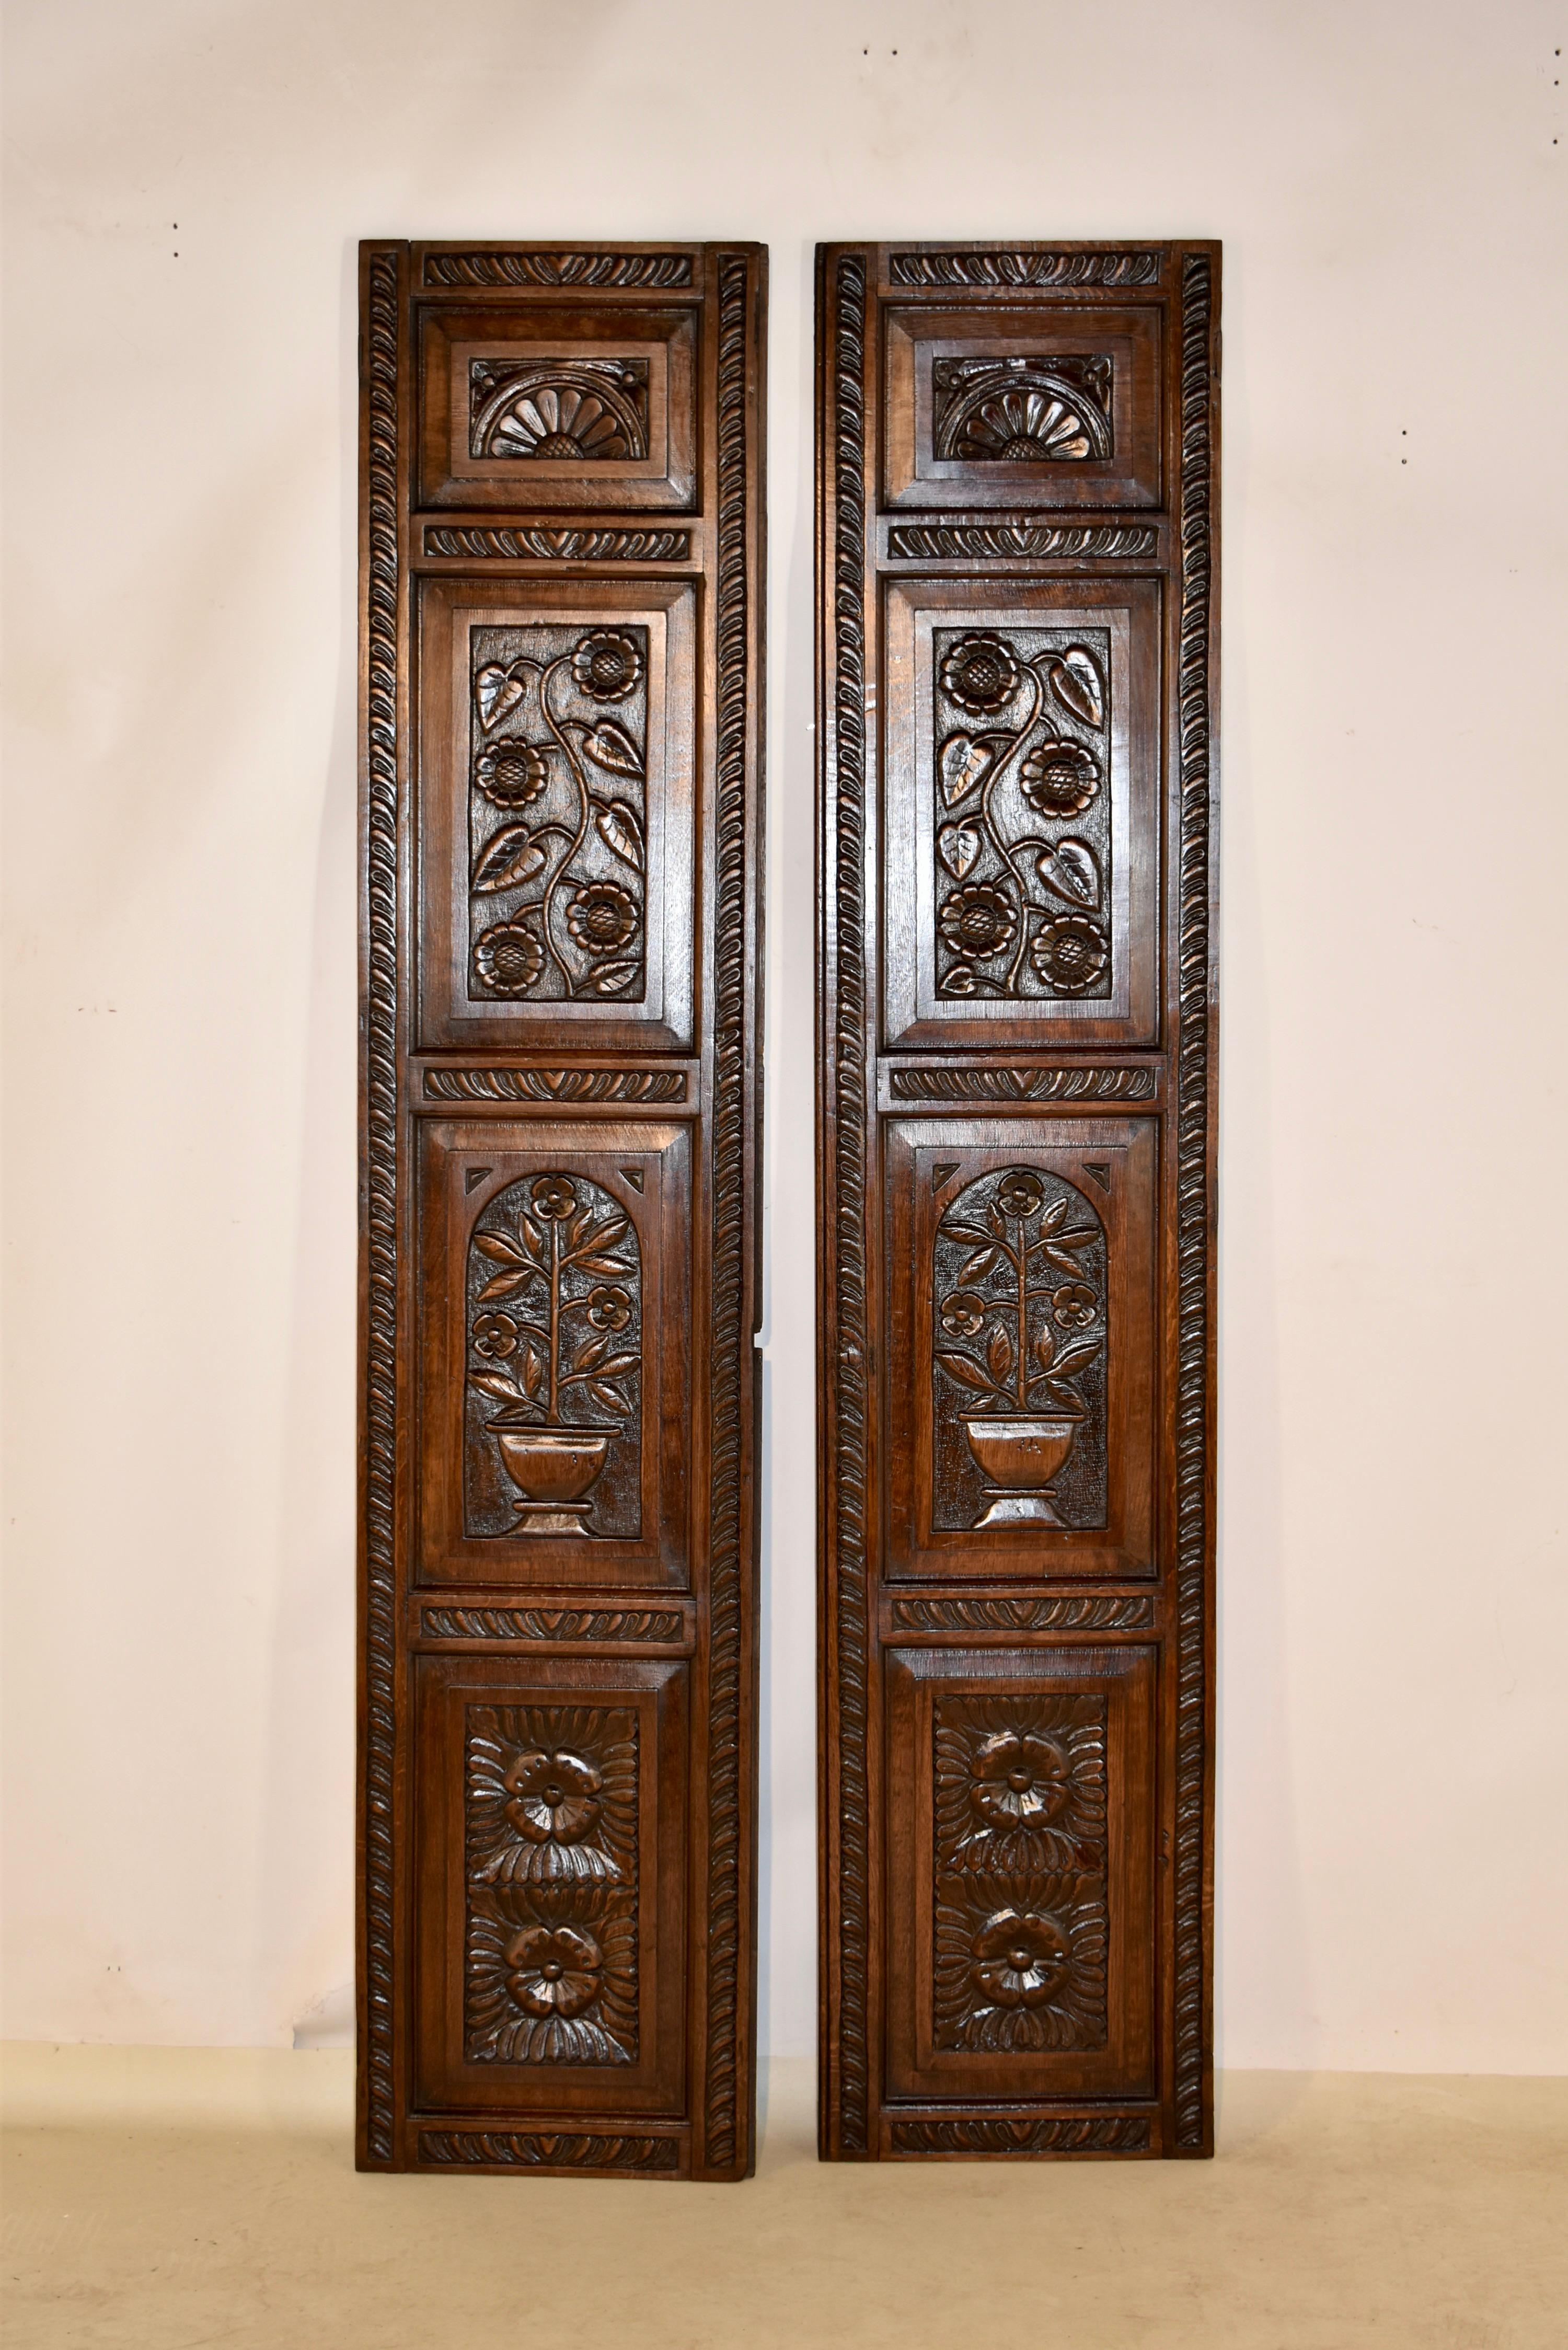 Pair of 18th century hand carved panels. They have hand carved banding surrounding raised panels with hand carved designs, including florals, vines, and carved transom like patterns at the tops. Wonderful hand planing on the backs.